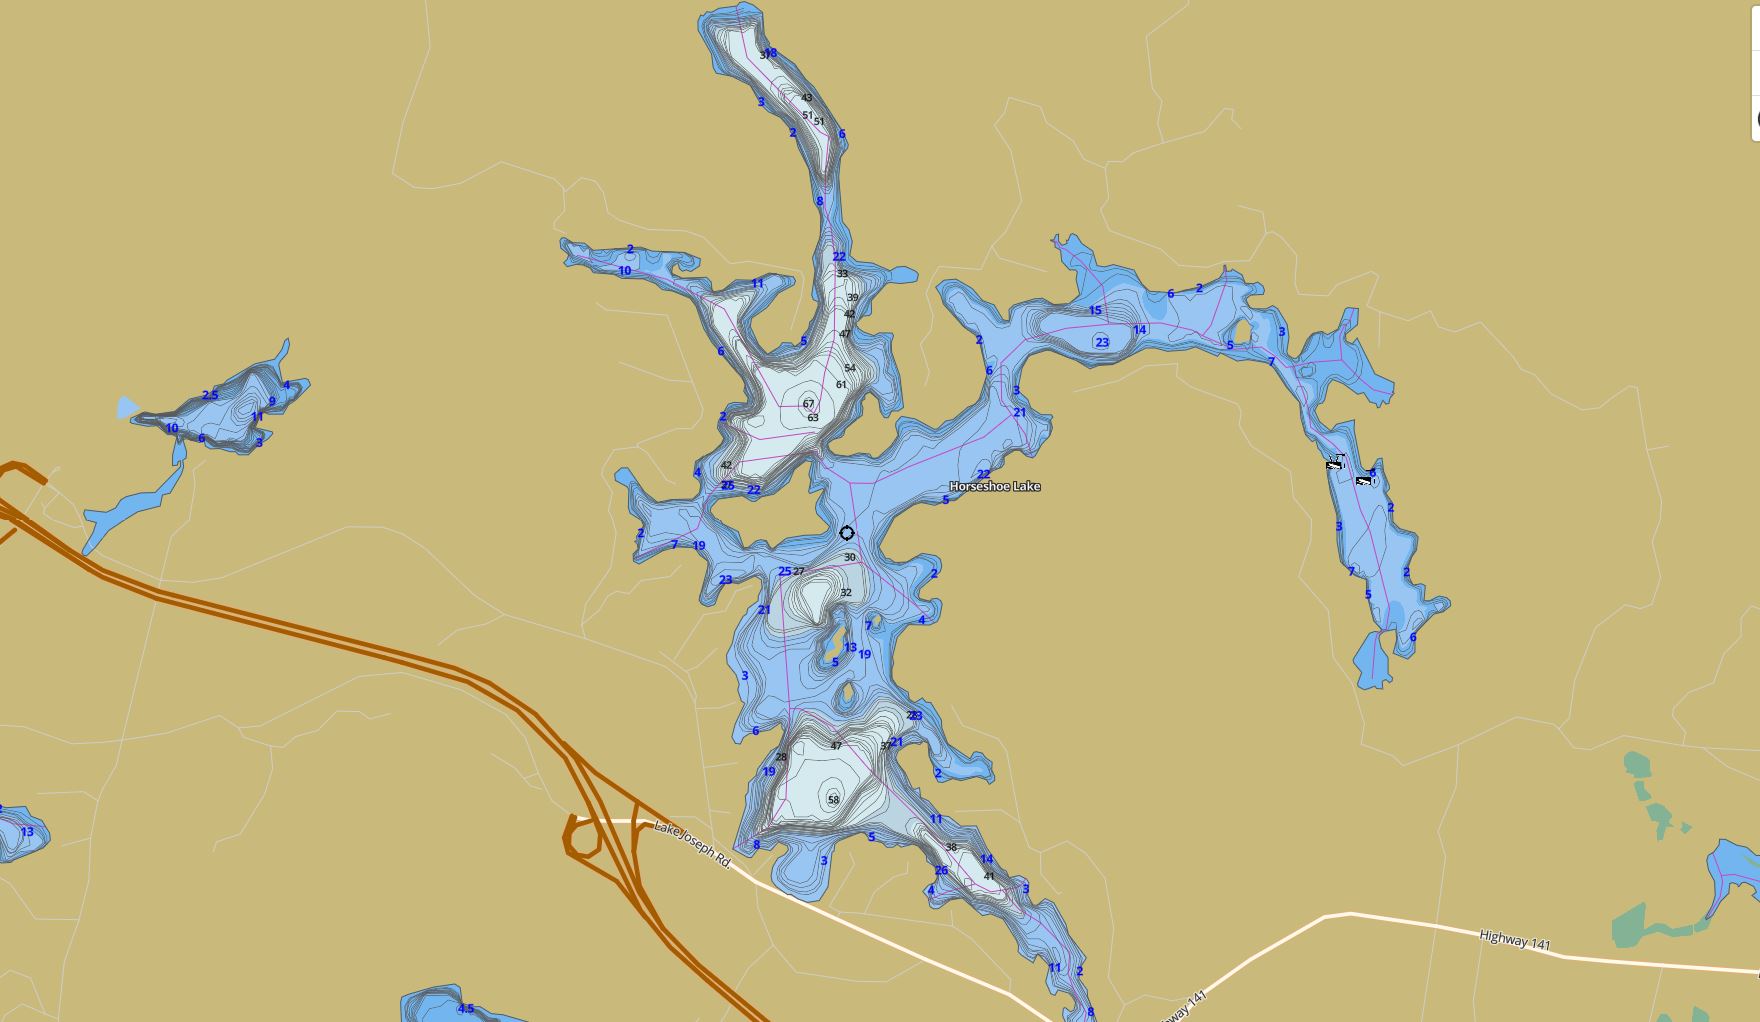 Contour Map of Horseshoe Lake in Municipality of Seguin and the District of Parry Sound